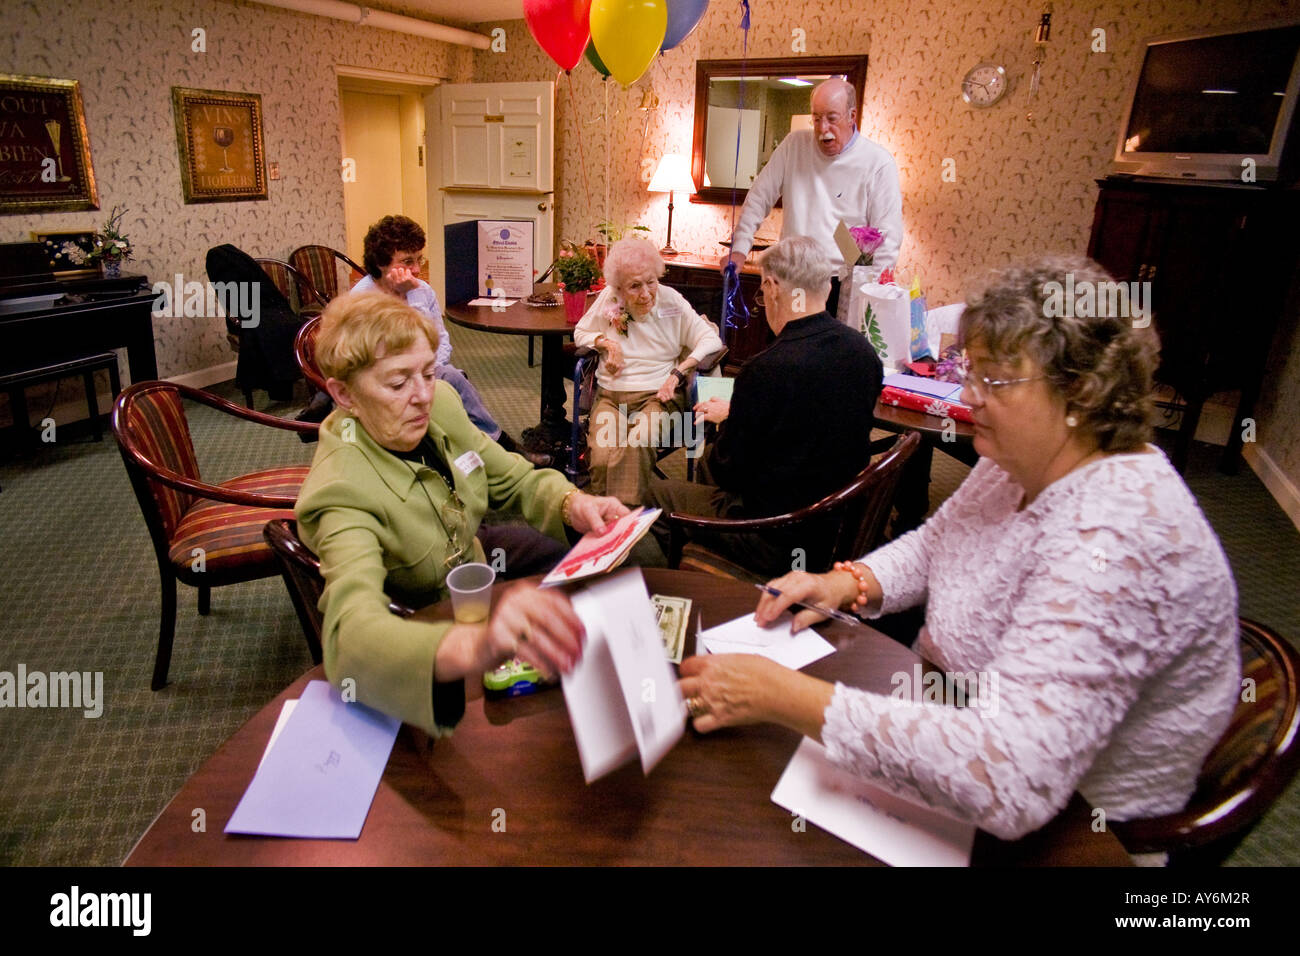 A relative reads birthday cards to centenarian after her 100th birthday party at a nursing home in Stoneham MA with friends Stock Photo